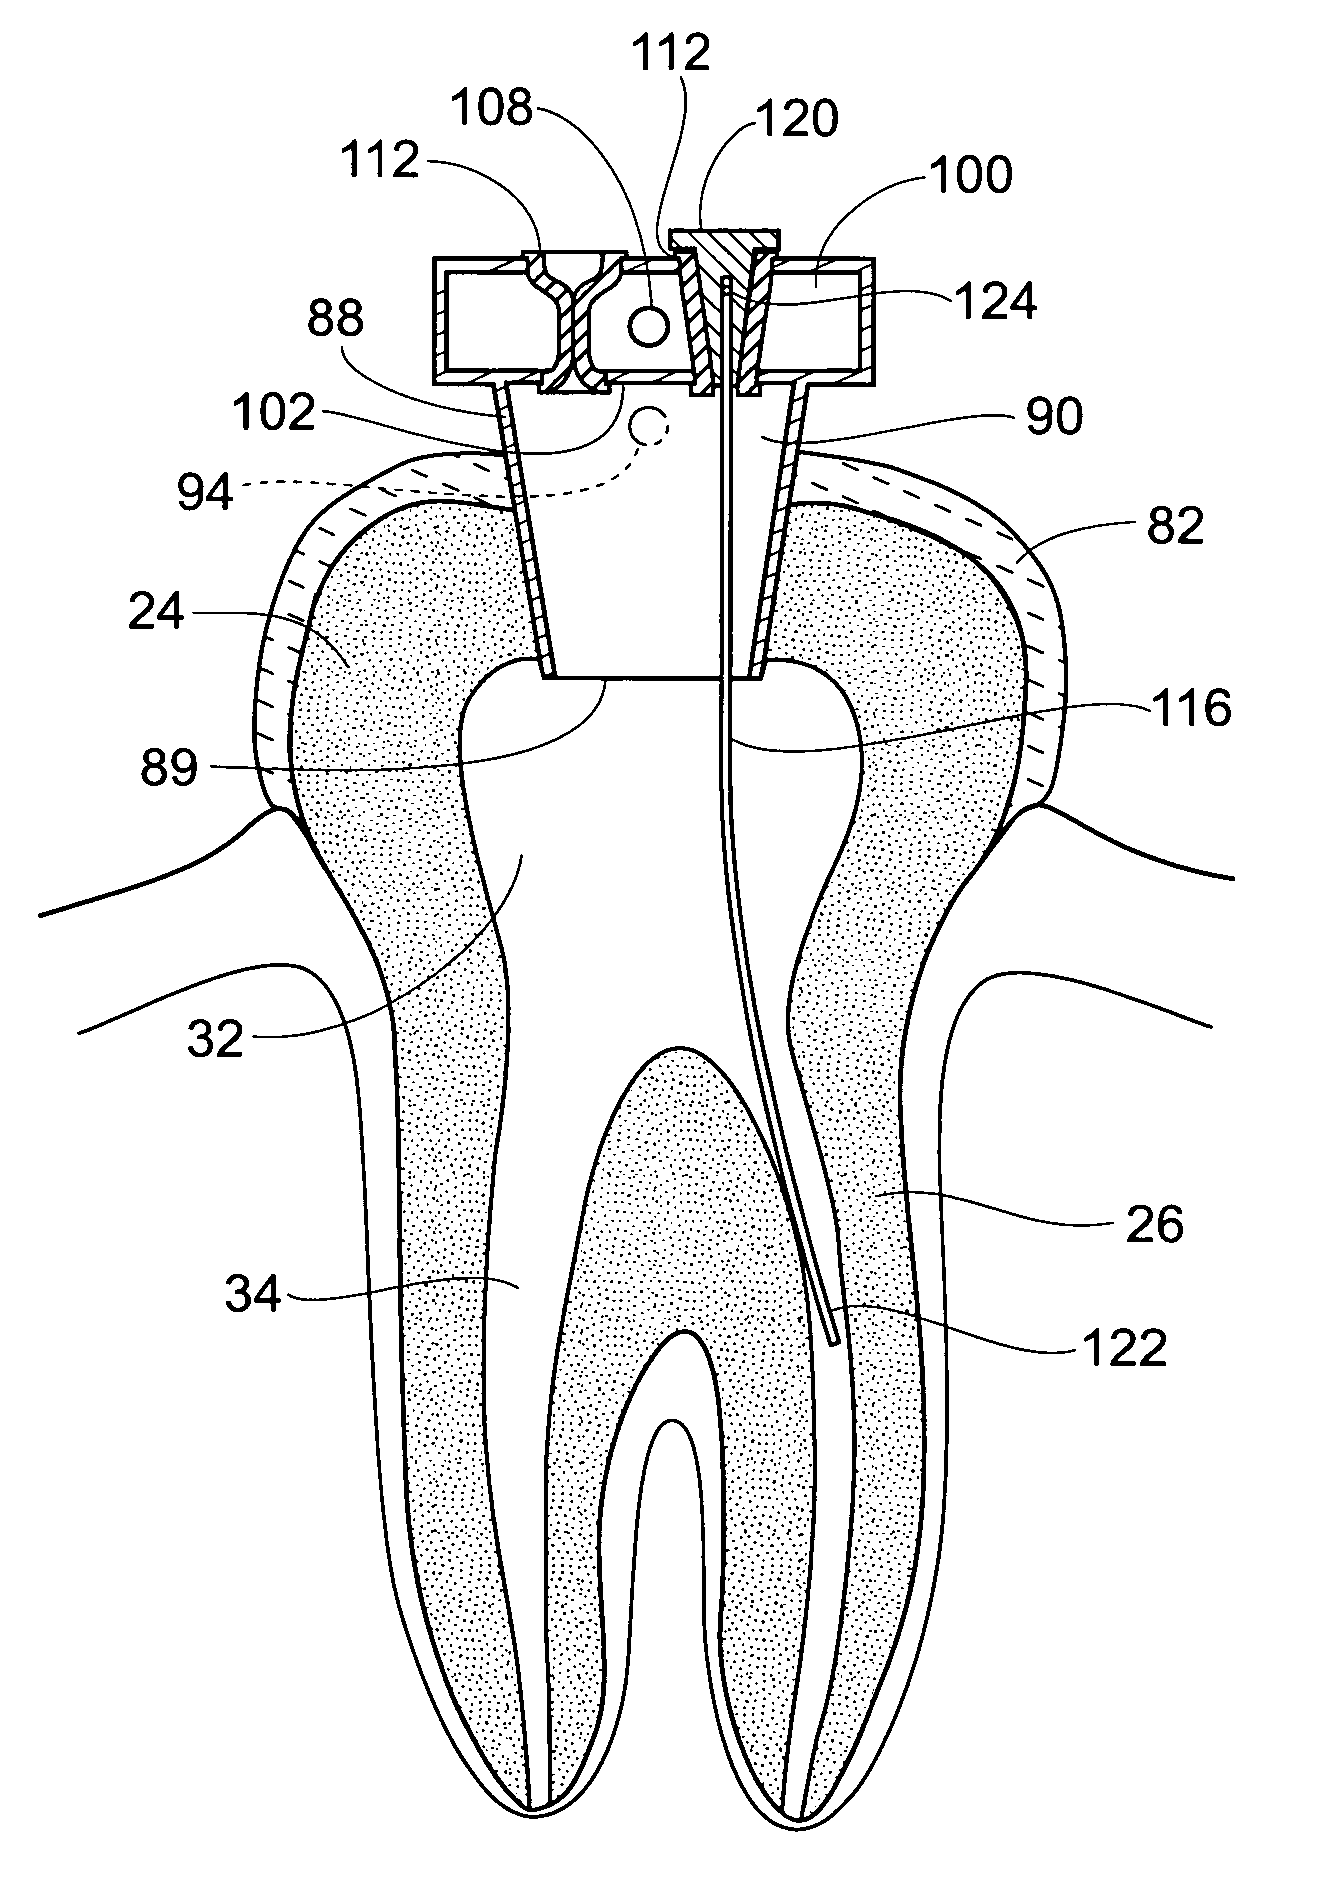 Apparatus and methods for treating tooth root canals